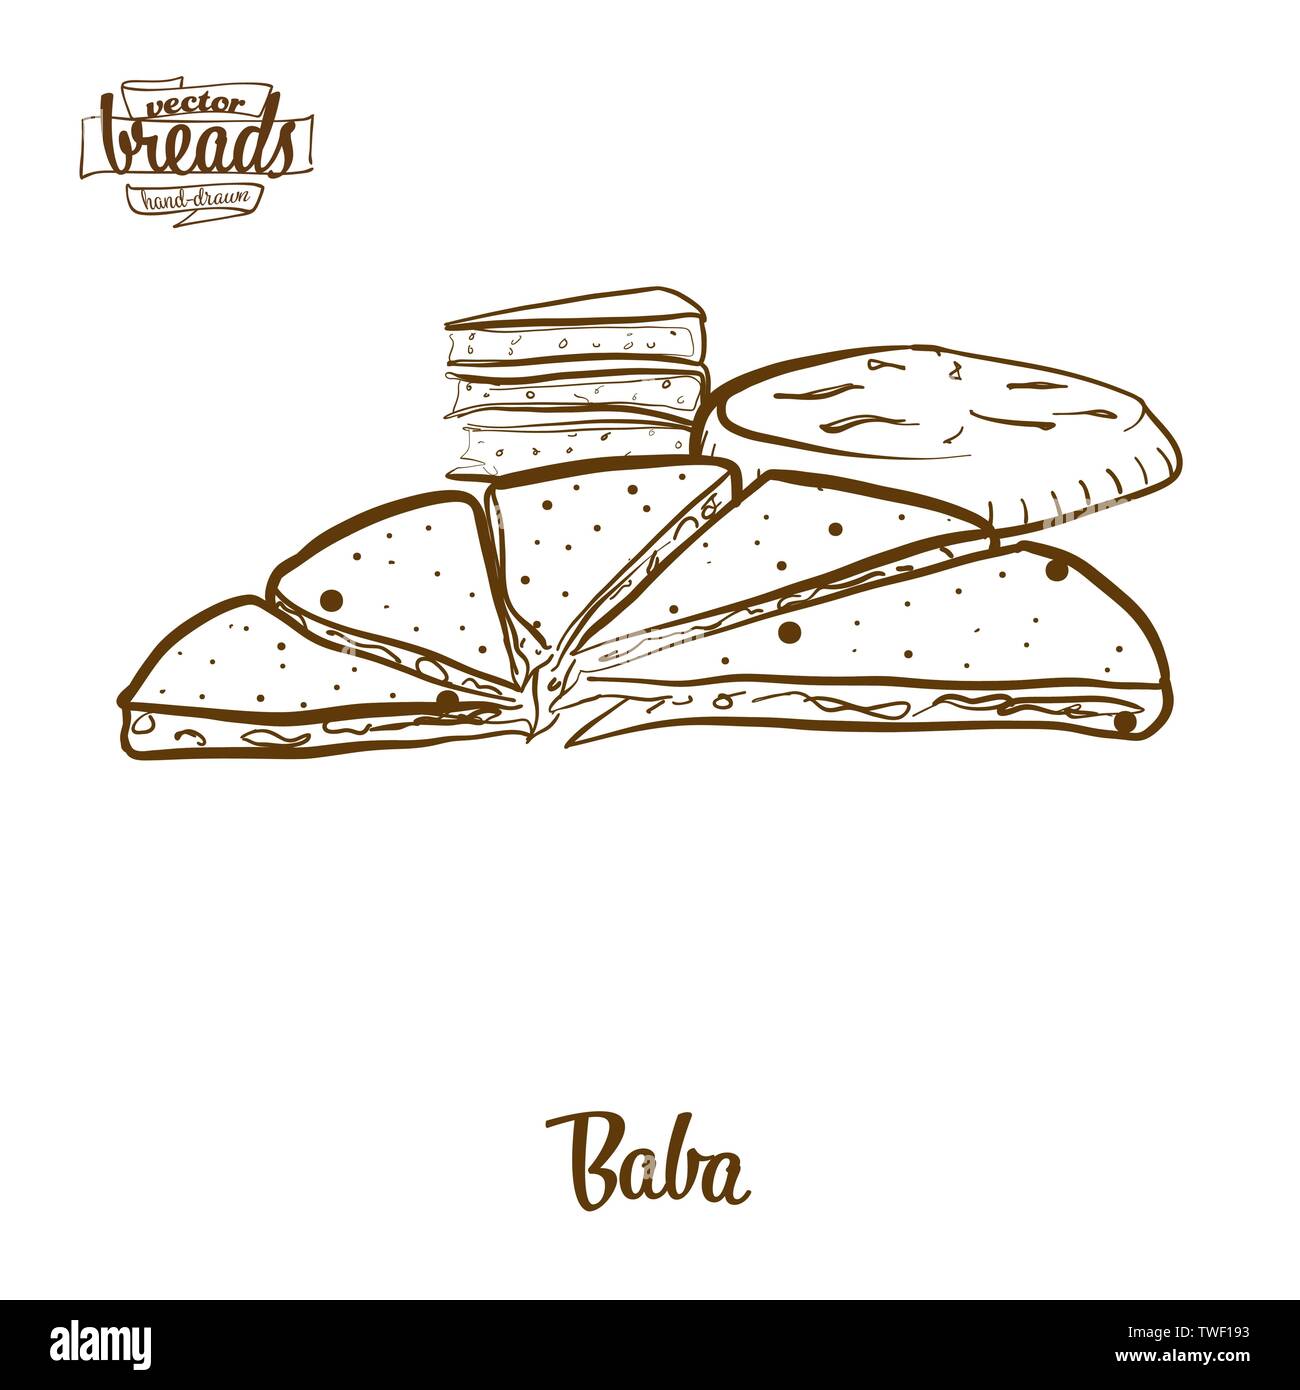 Baba bread vector drawing. Food sketch of Various thick, round breads, usually known in China, Yunnan, naxi, people. Bakery illustration series. Stock Vector